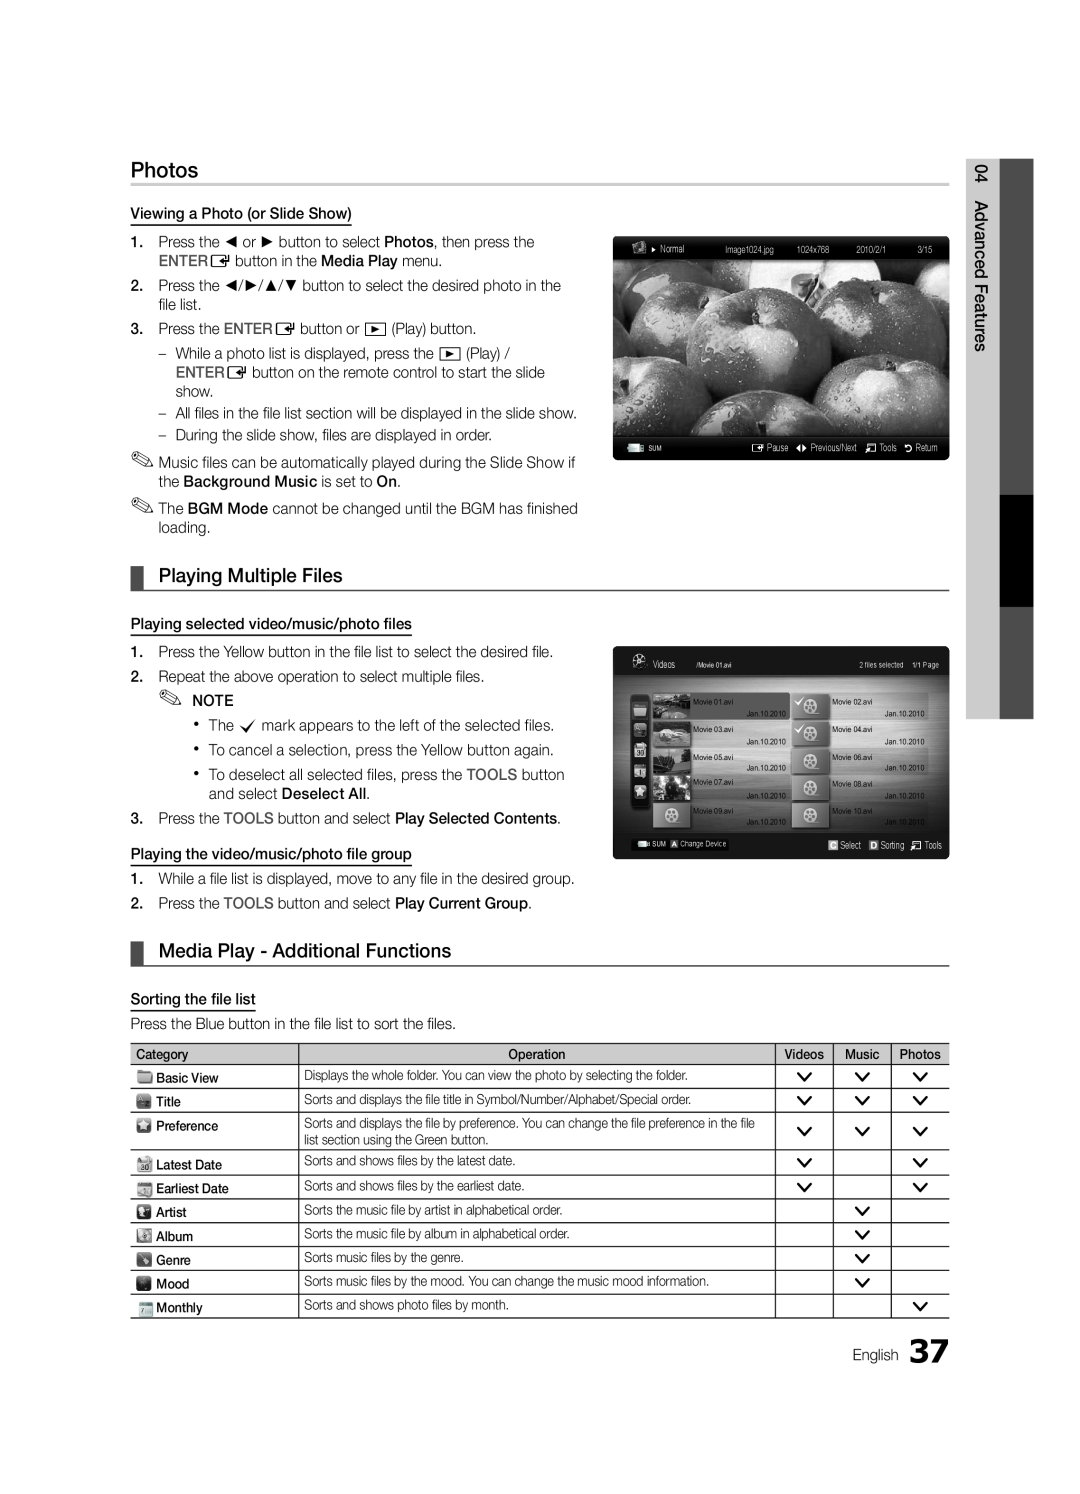 Samsung UC5000-ZC, BN68-03004B-02 user manual Photos, Playing Multiple Files, Media Play - Additional Functions 